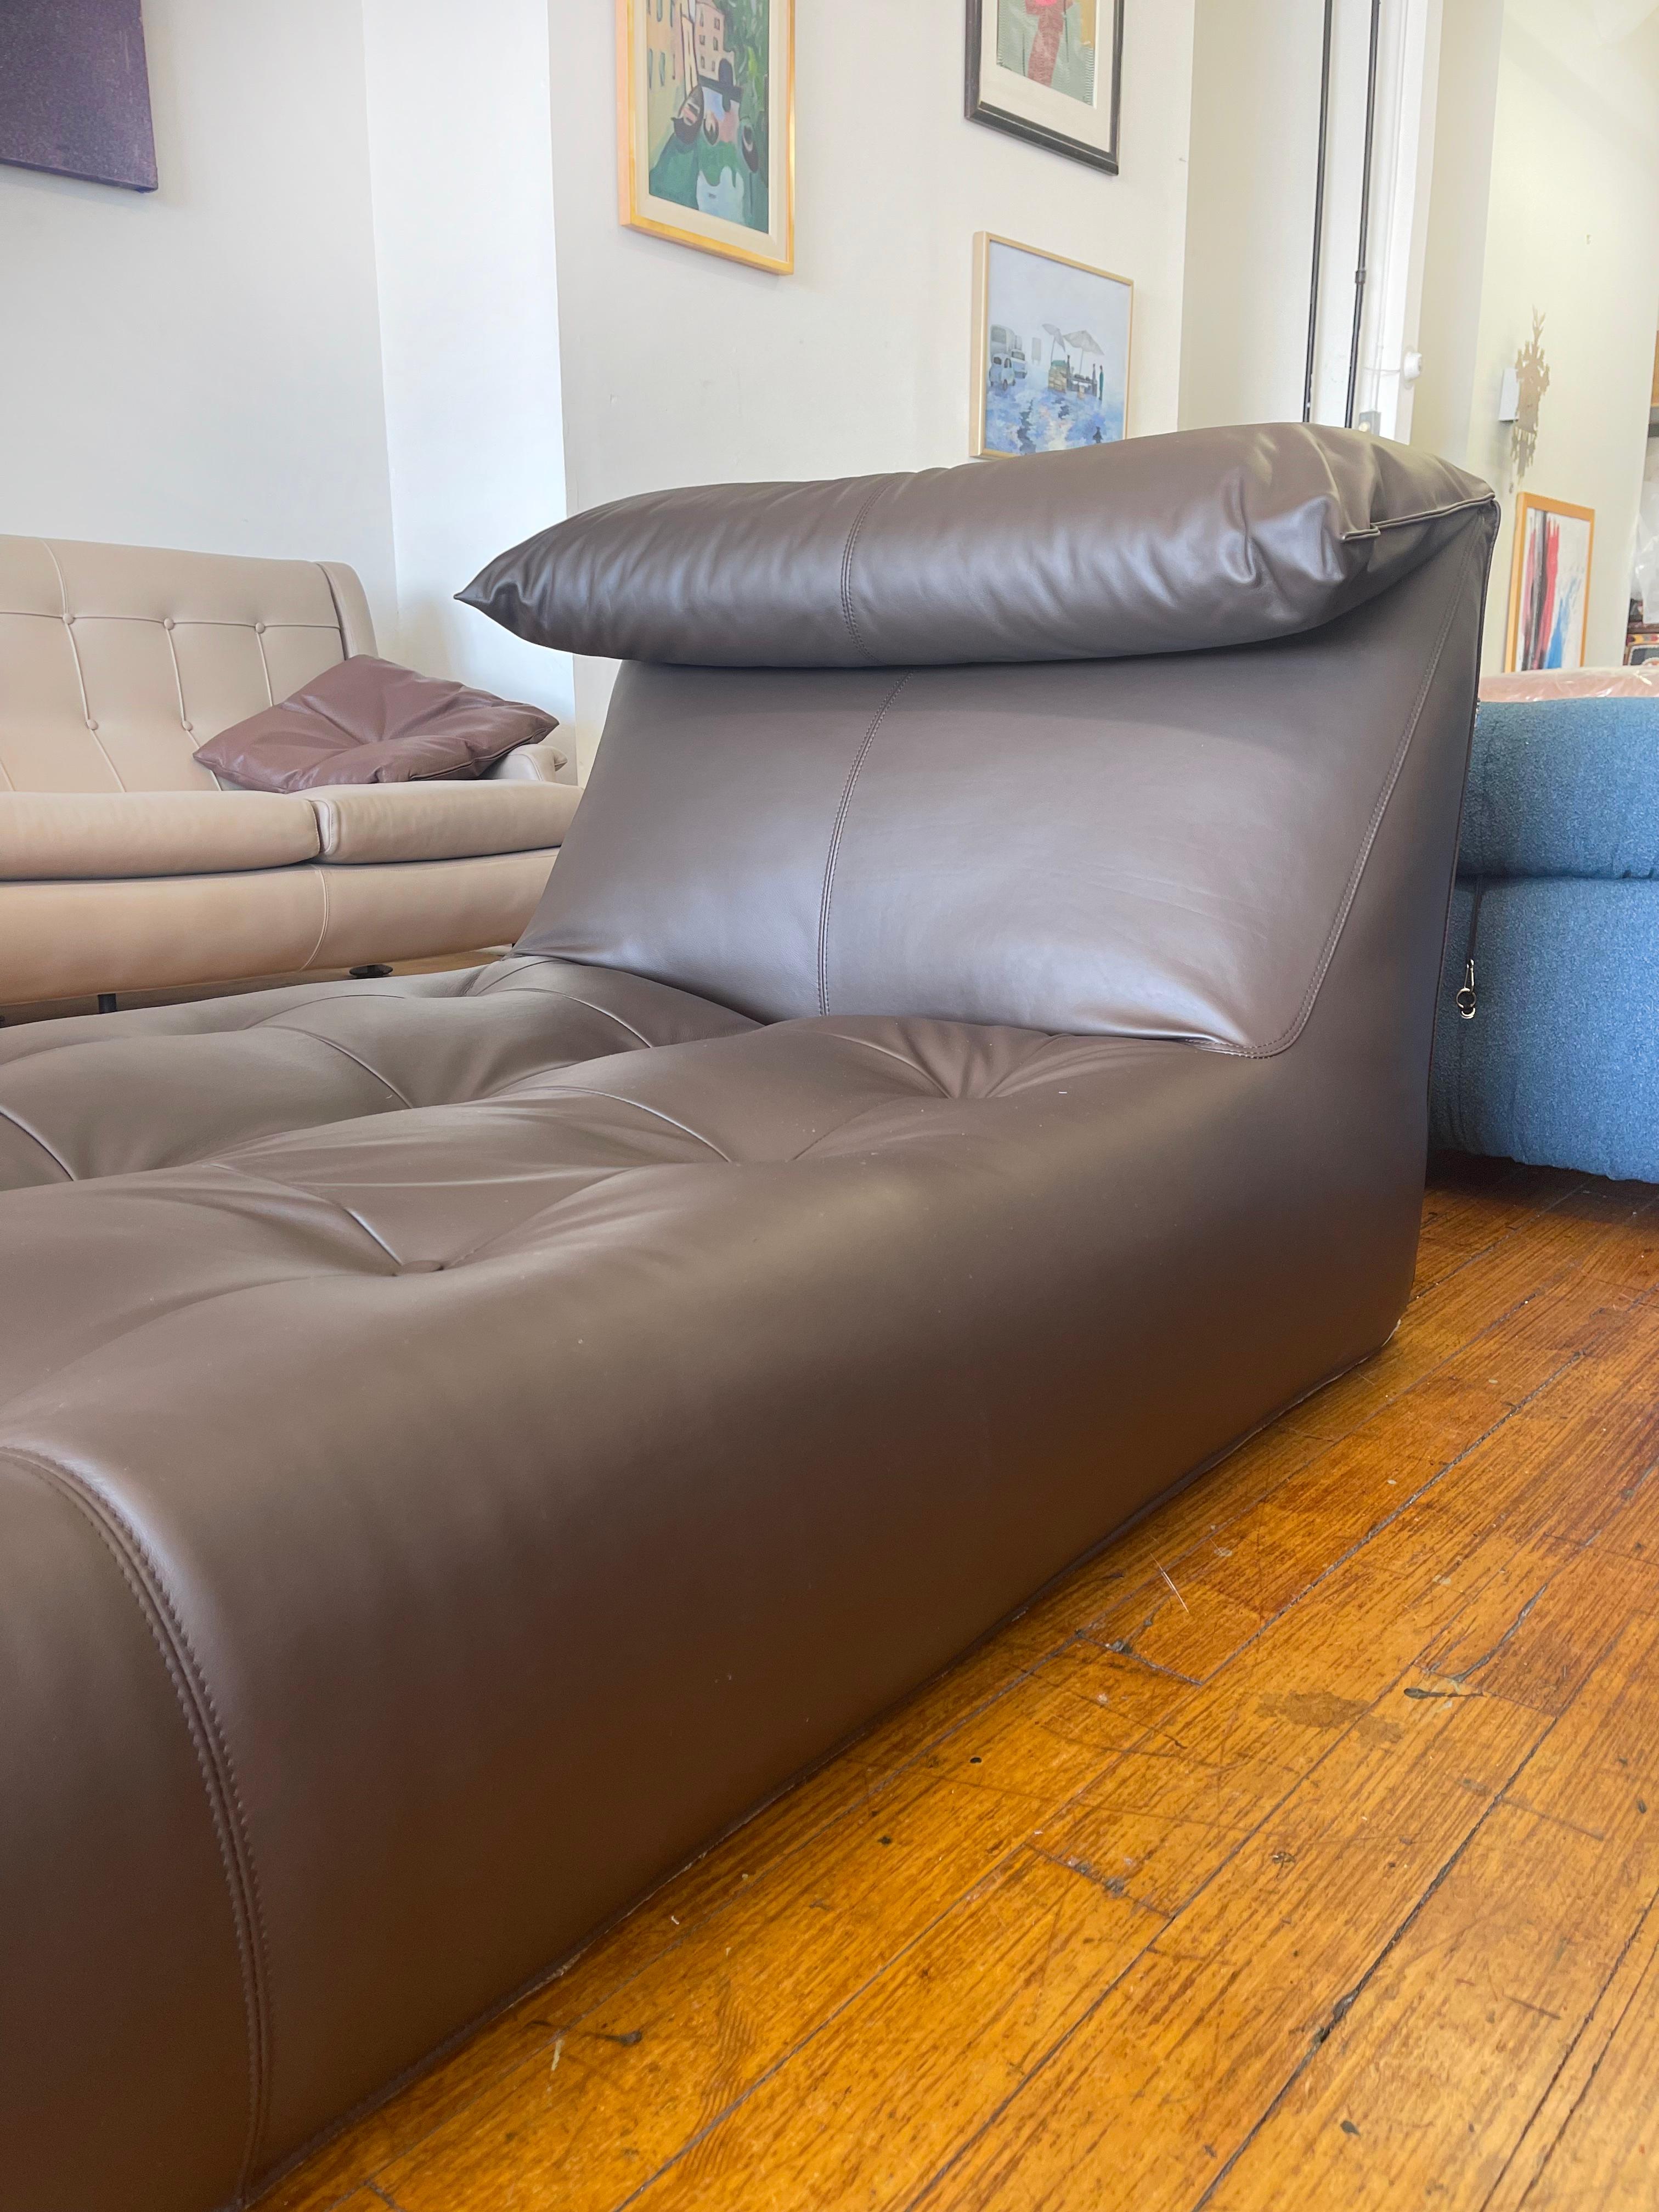 Mario Bellini Le Bambole Daybed 1970s B&B Italia newly upholstered brown leather For Sale 1